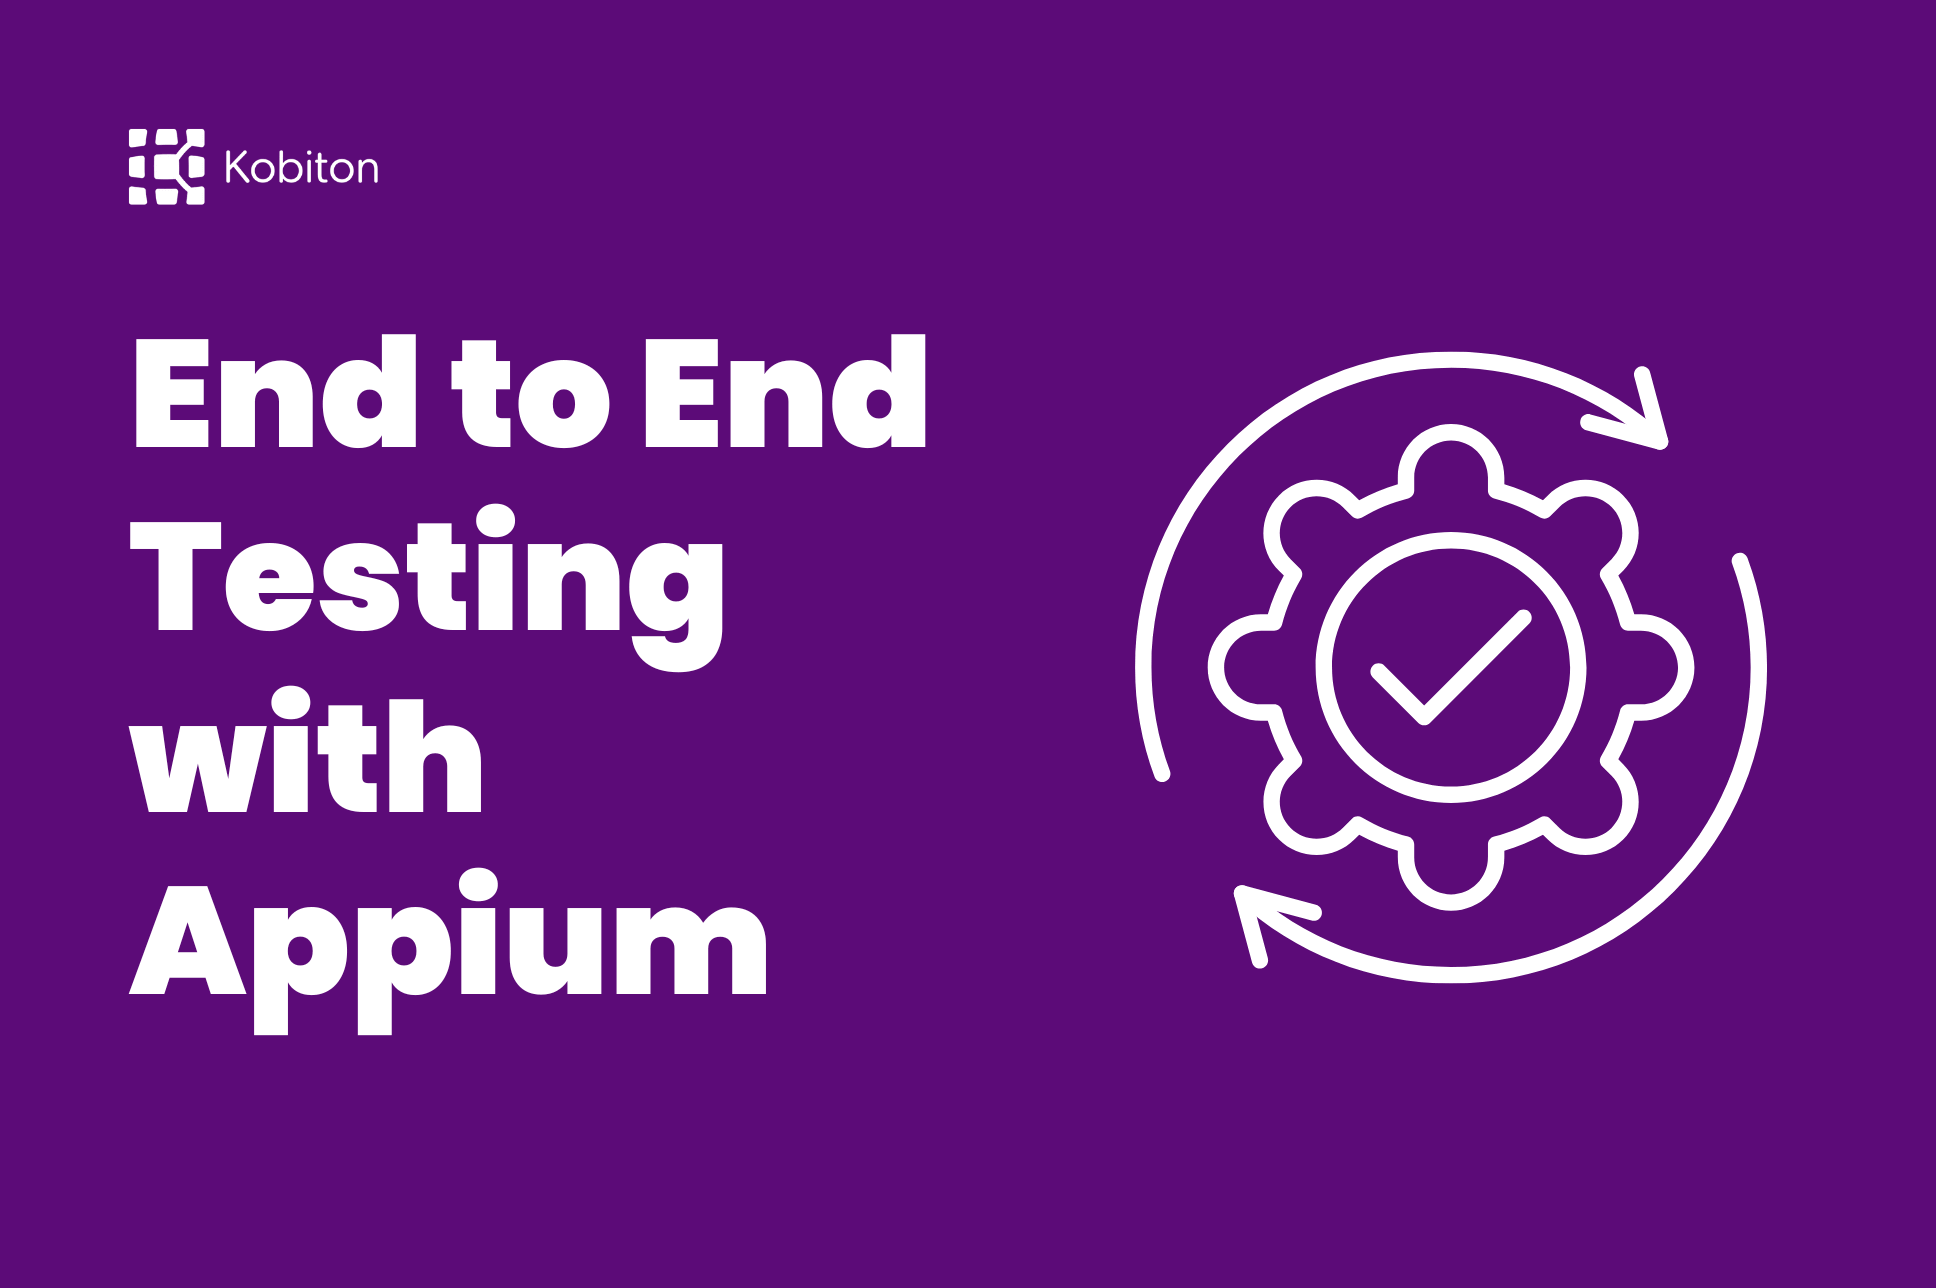 End to end testing with appium